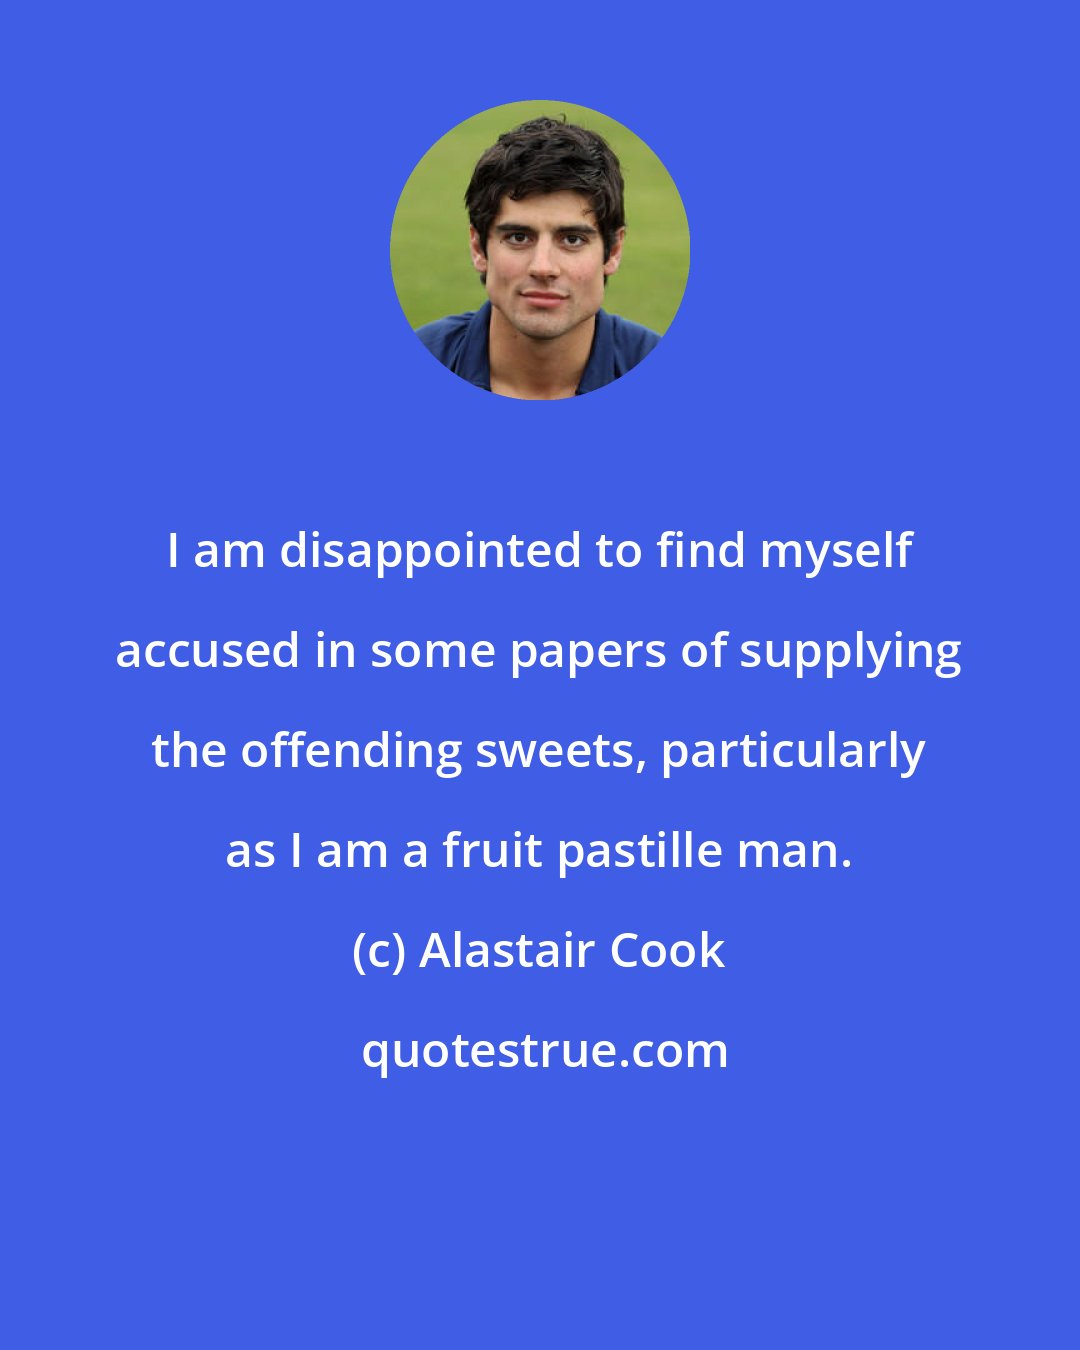 Alastair Cook: I am disappointed to find myself accused in some papers of supplying the offending sweets, particularly as I am a fruit pastille man.